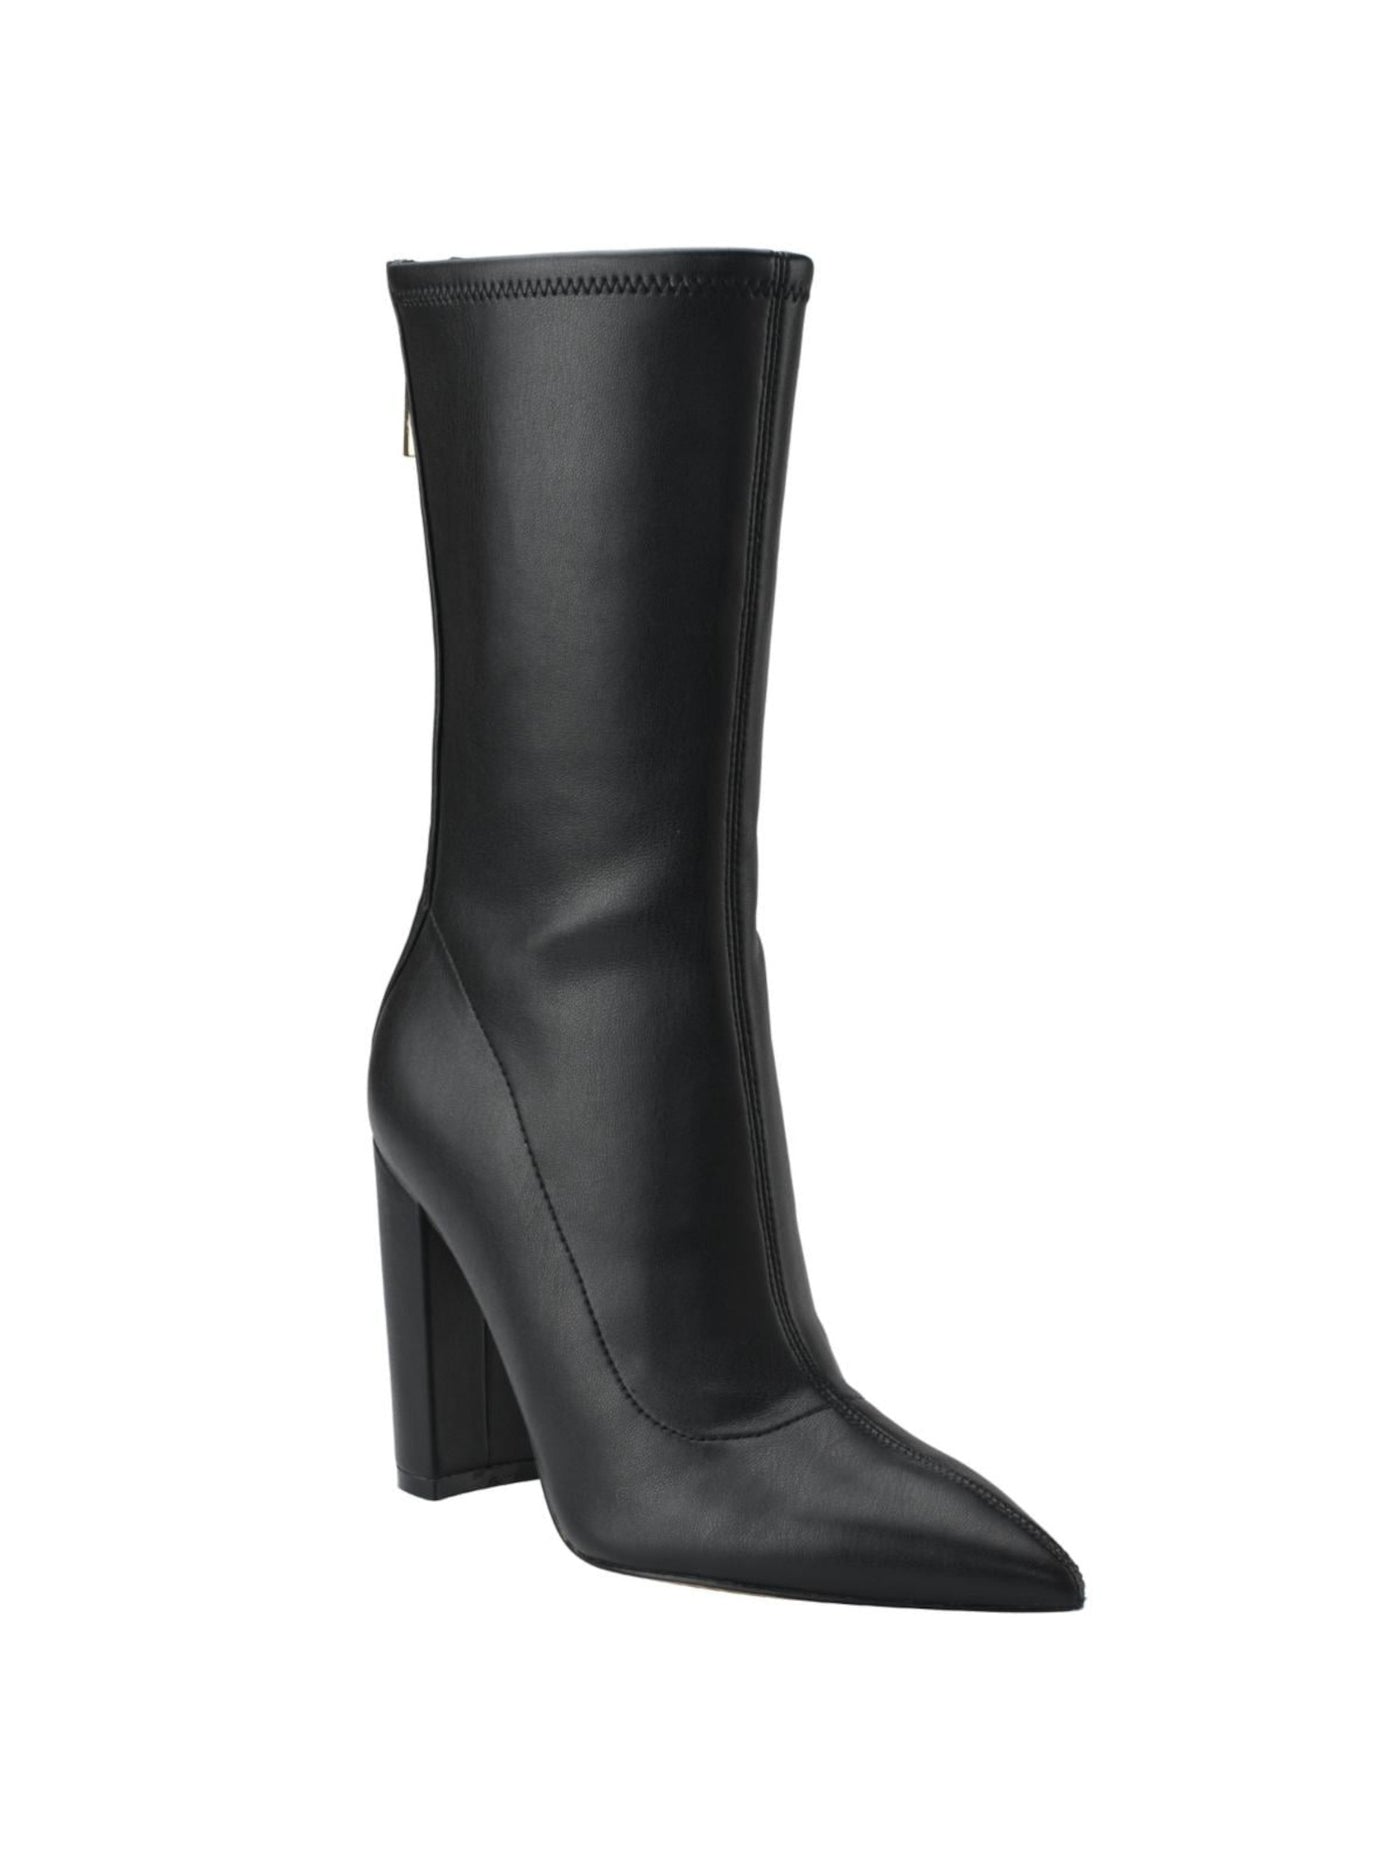 GUESS Womens Black Abbale Pointy Toe Block Heel Zip-Up Dress Boots 9 M